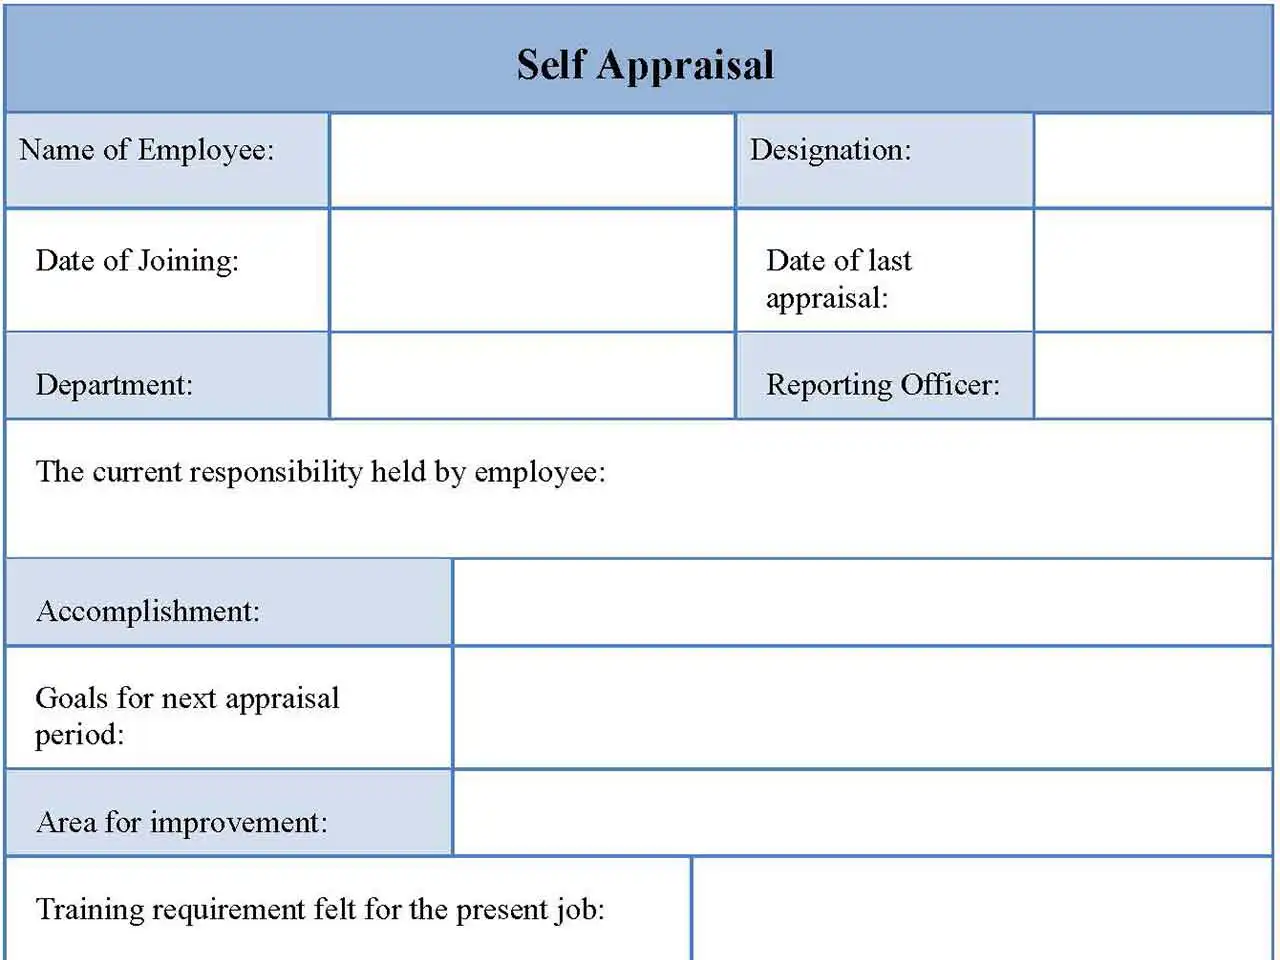 Self Appraisal Fillable PDF Form And Word Document